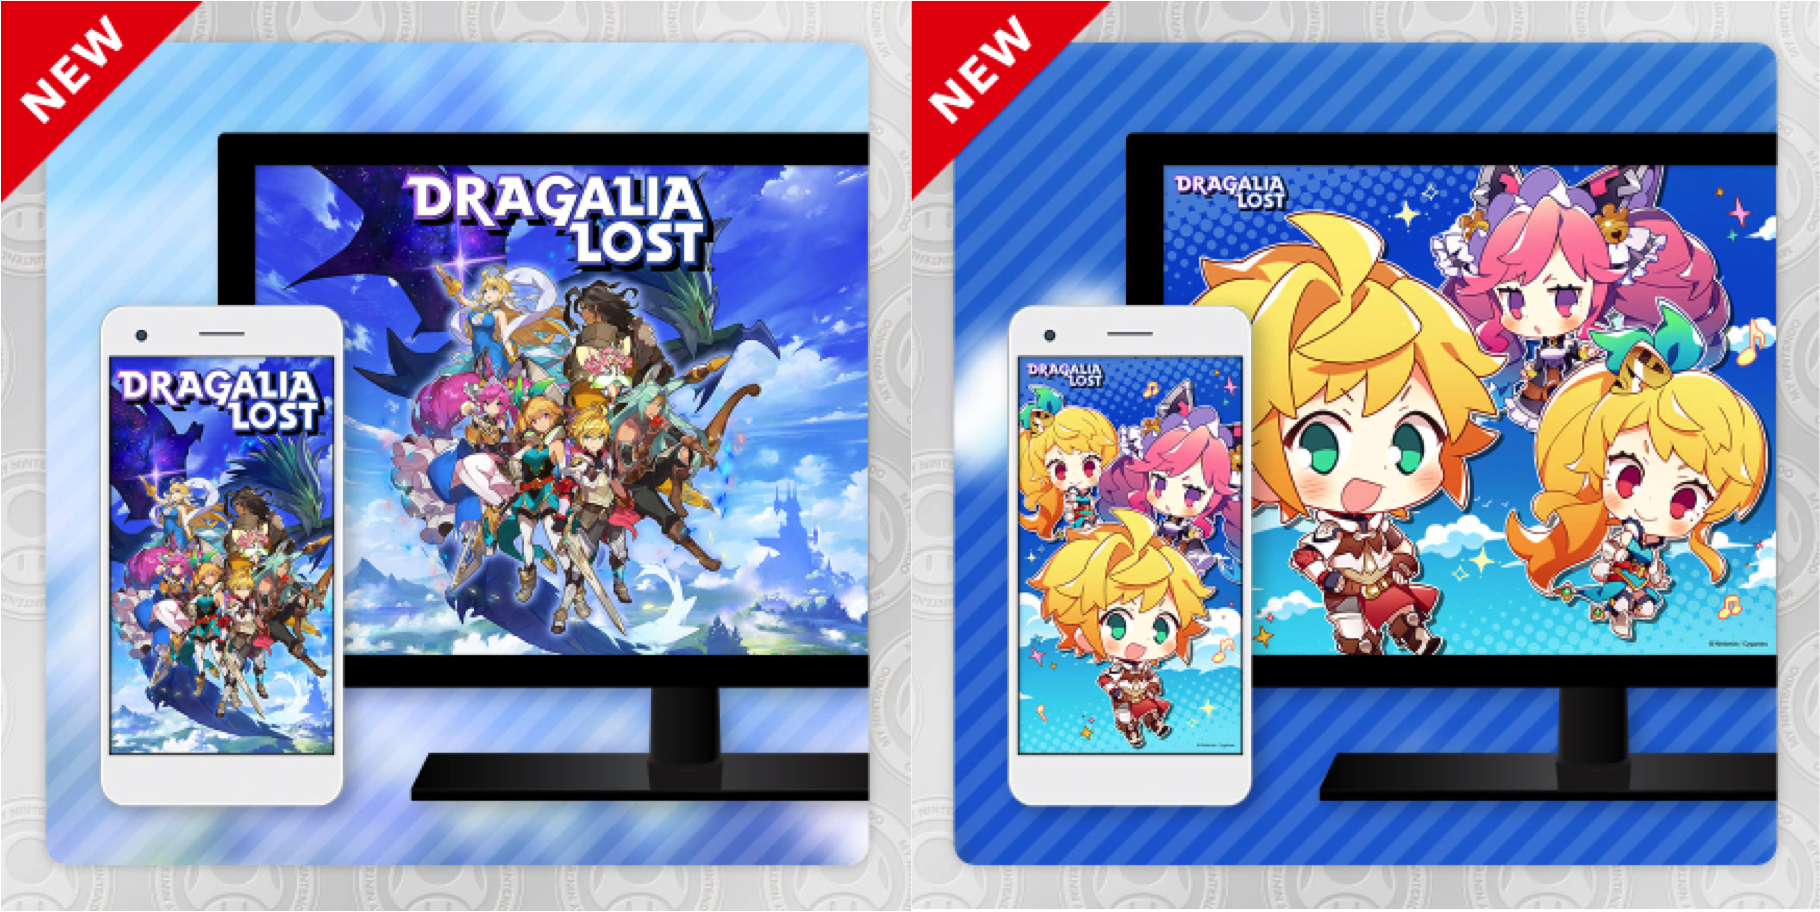 nintendo s mobile rpg dragalia lost is now available in the uk australia canada and more nintendo life